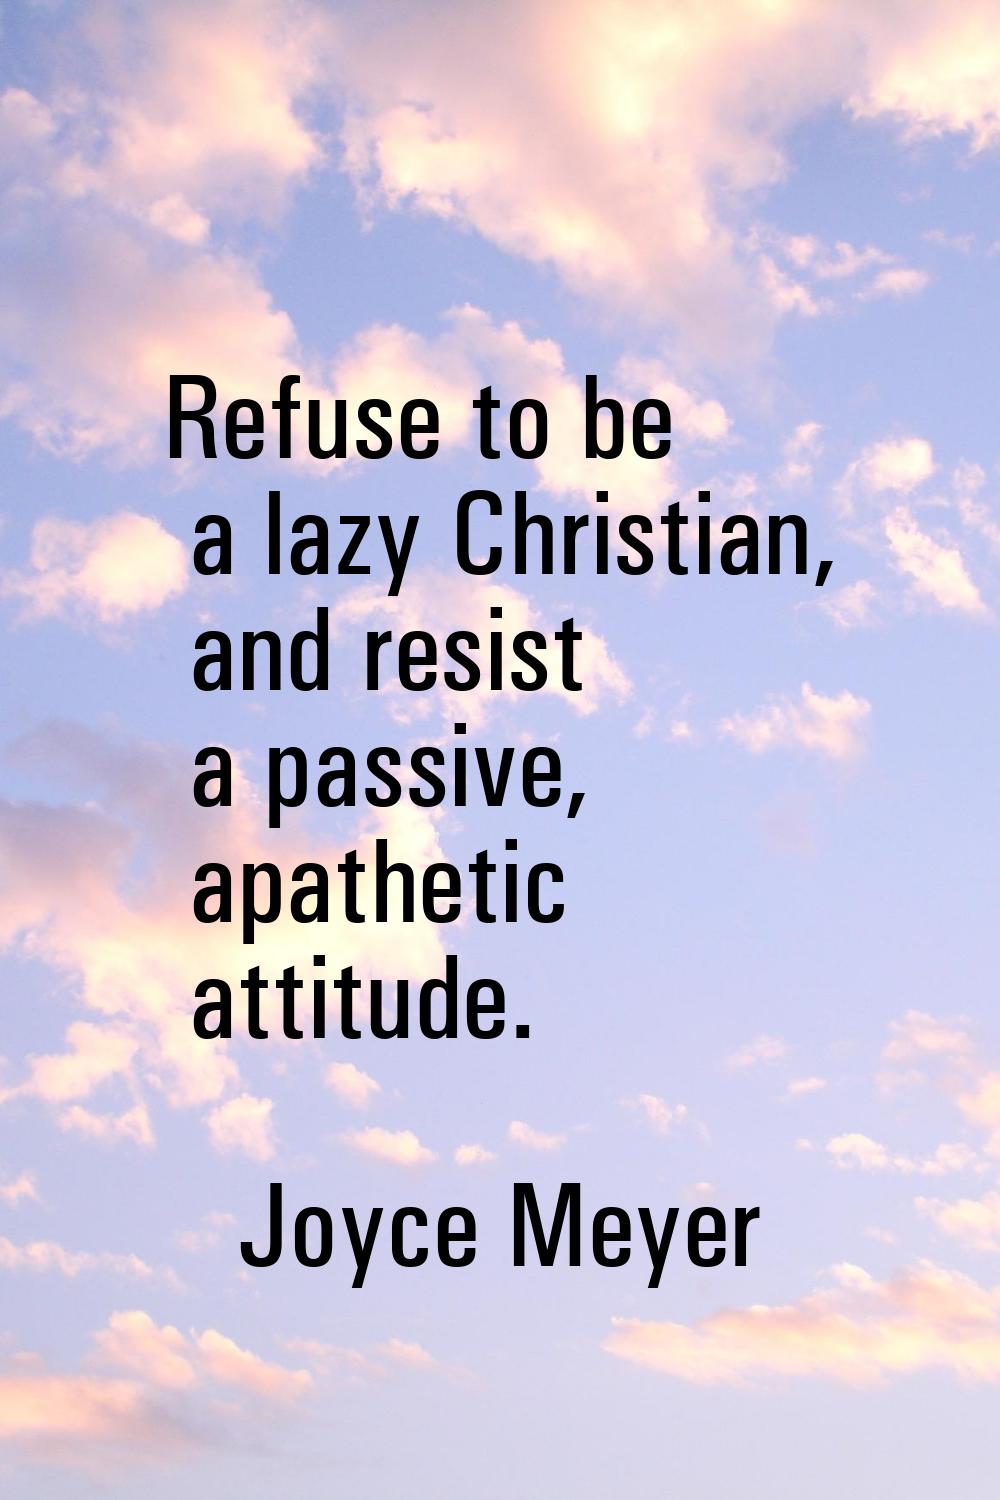 Refuse to be a lazy Christian, and resist a passive, apathetic attitude.